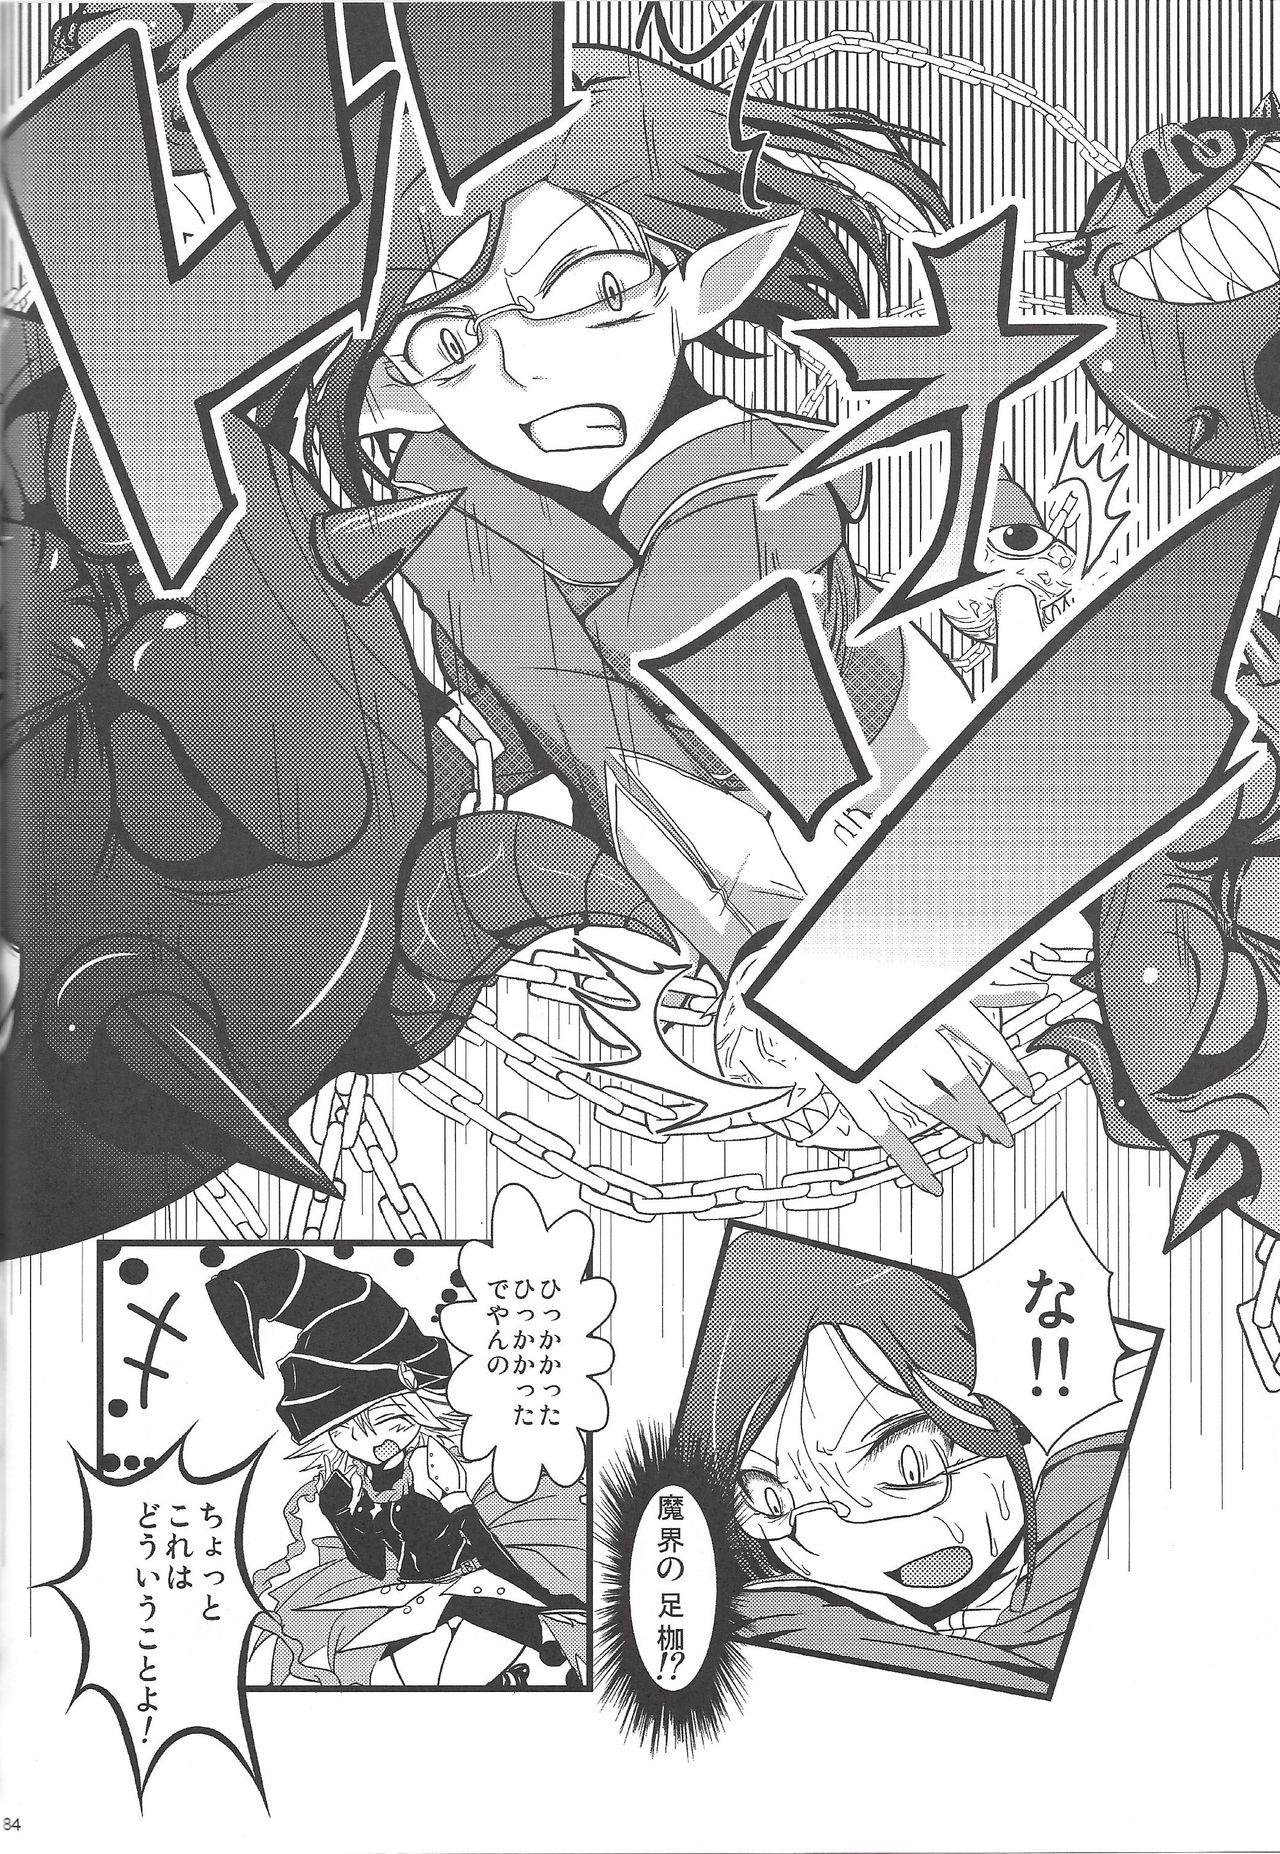 Instant issue Yu ☆ Gi ☆ Oh 52